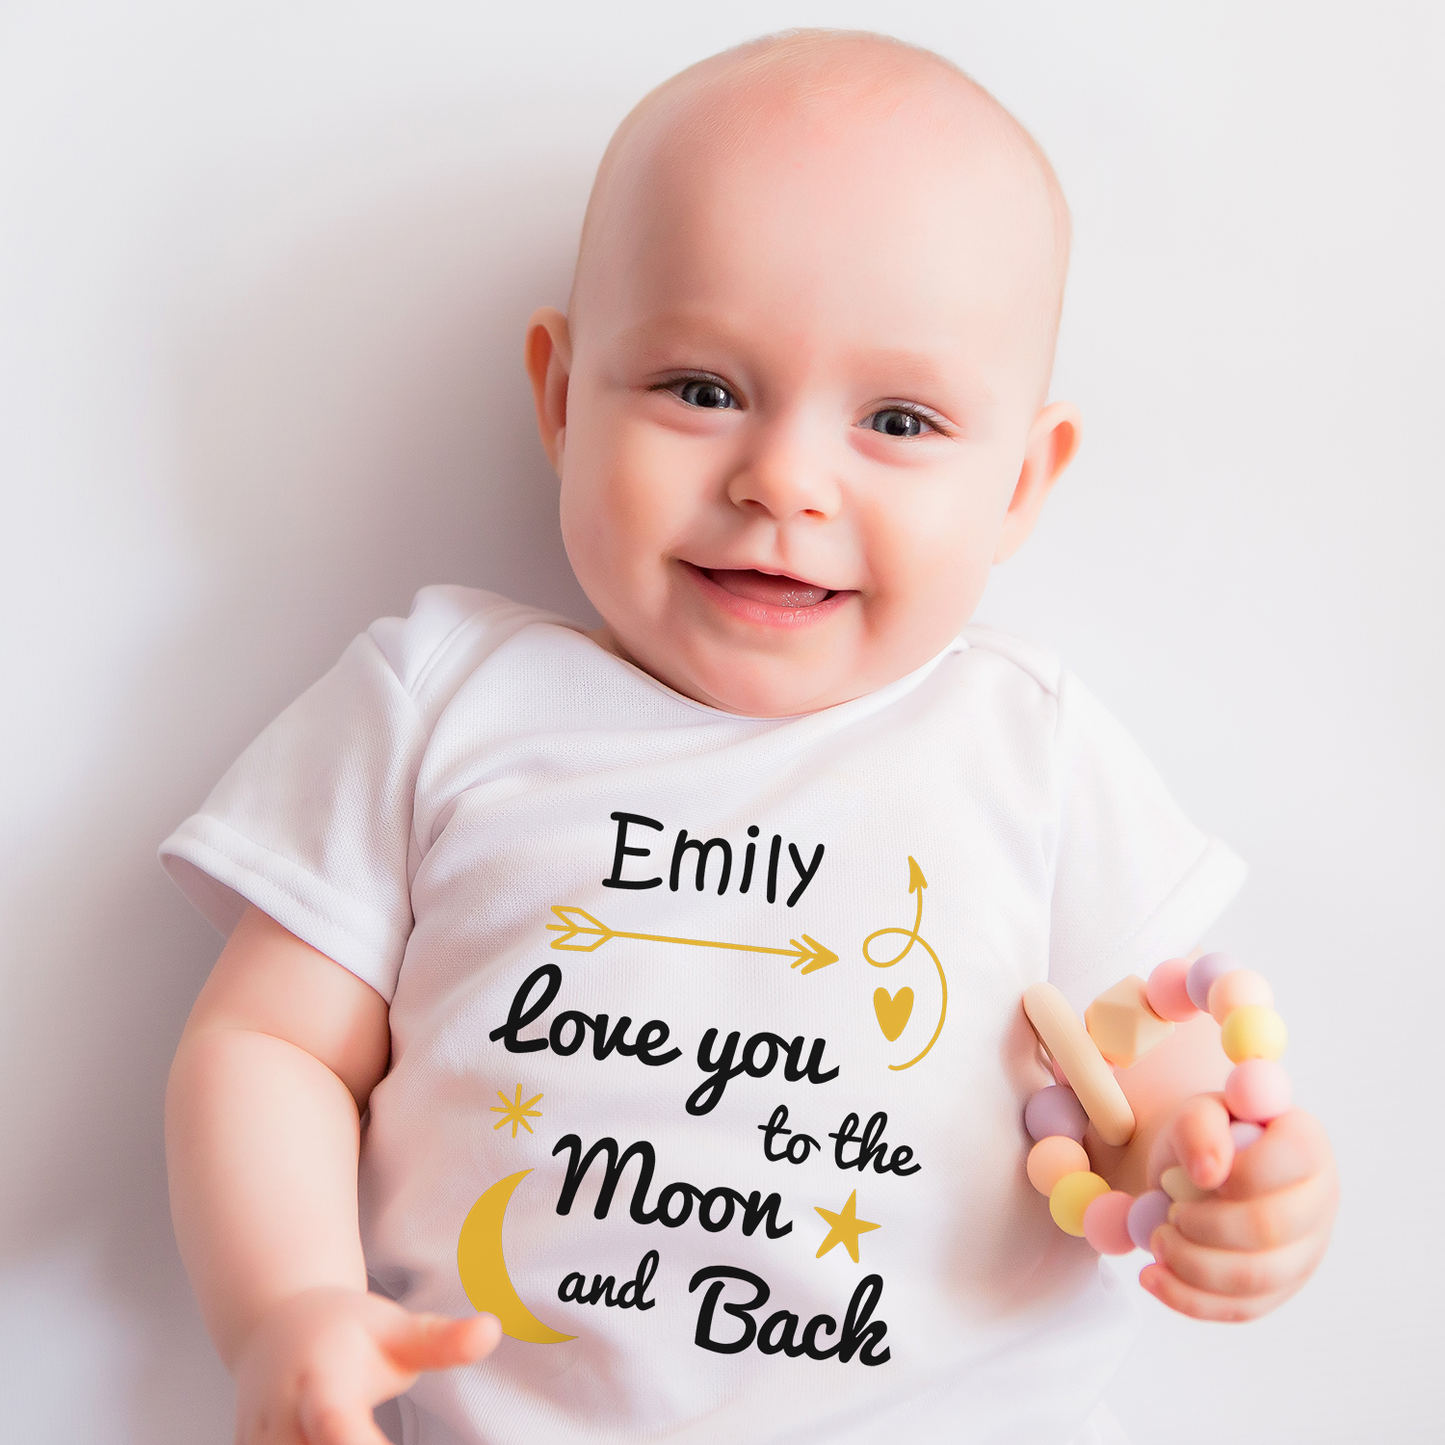 [Personalized] Endanzoo Organic Baby Bodysuit - Love You To The Moon & Back